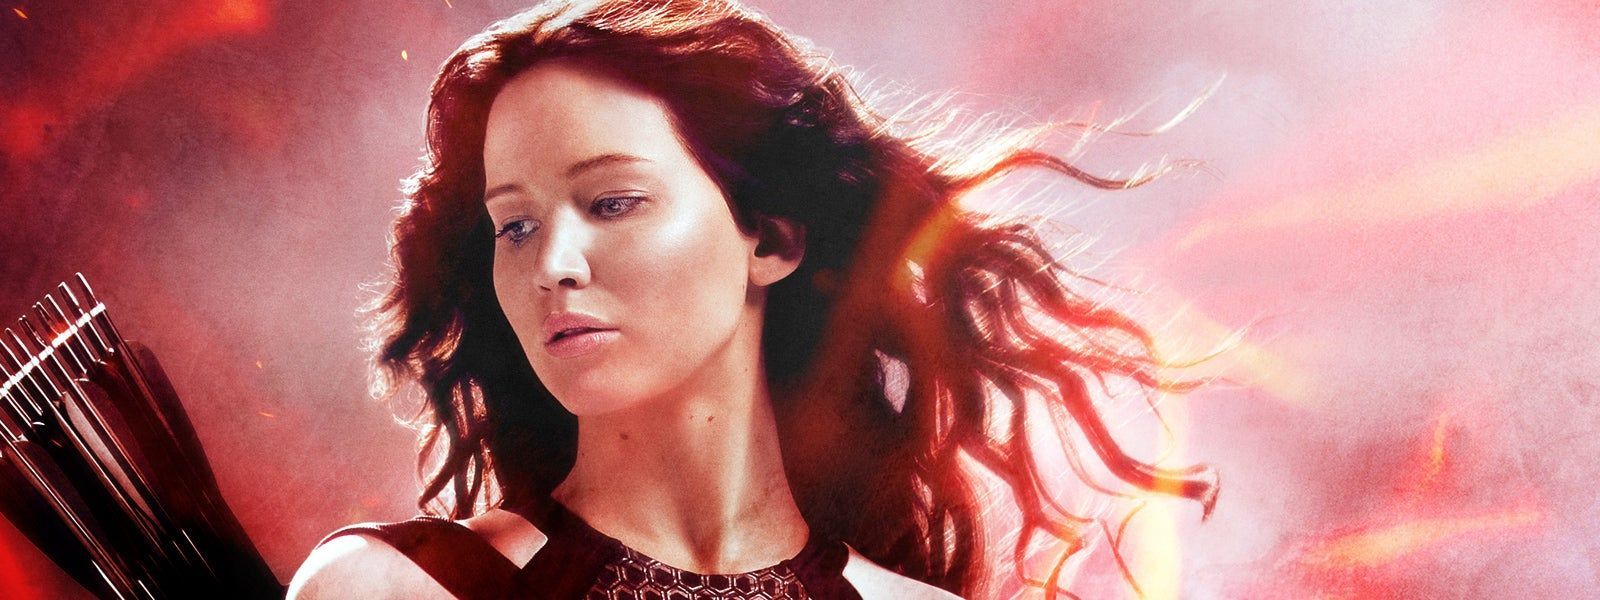 The Hunger Games Mockingjay Part 1 review: A weak start to a promising trilogy - Jennifer Lawrence